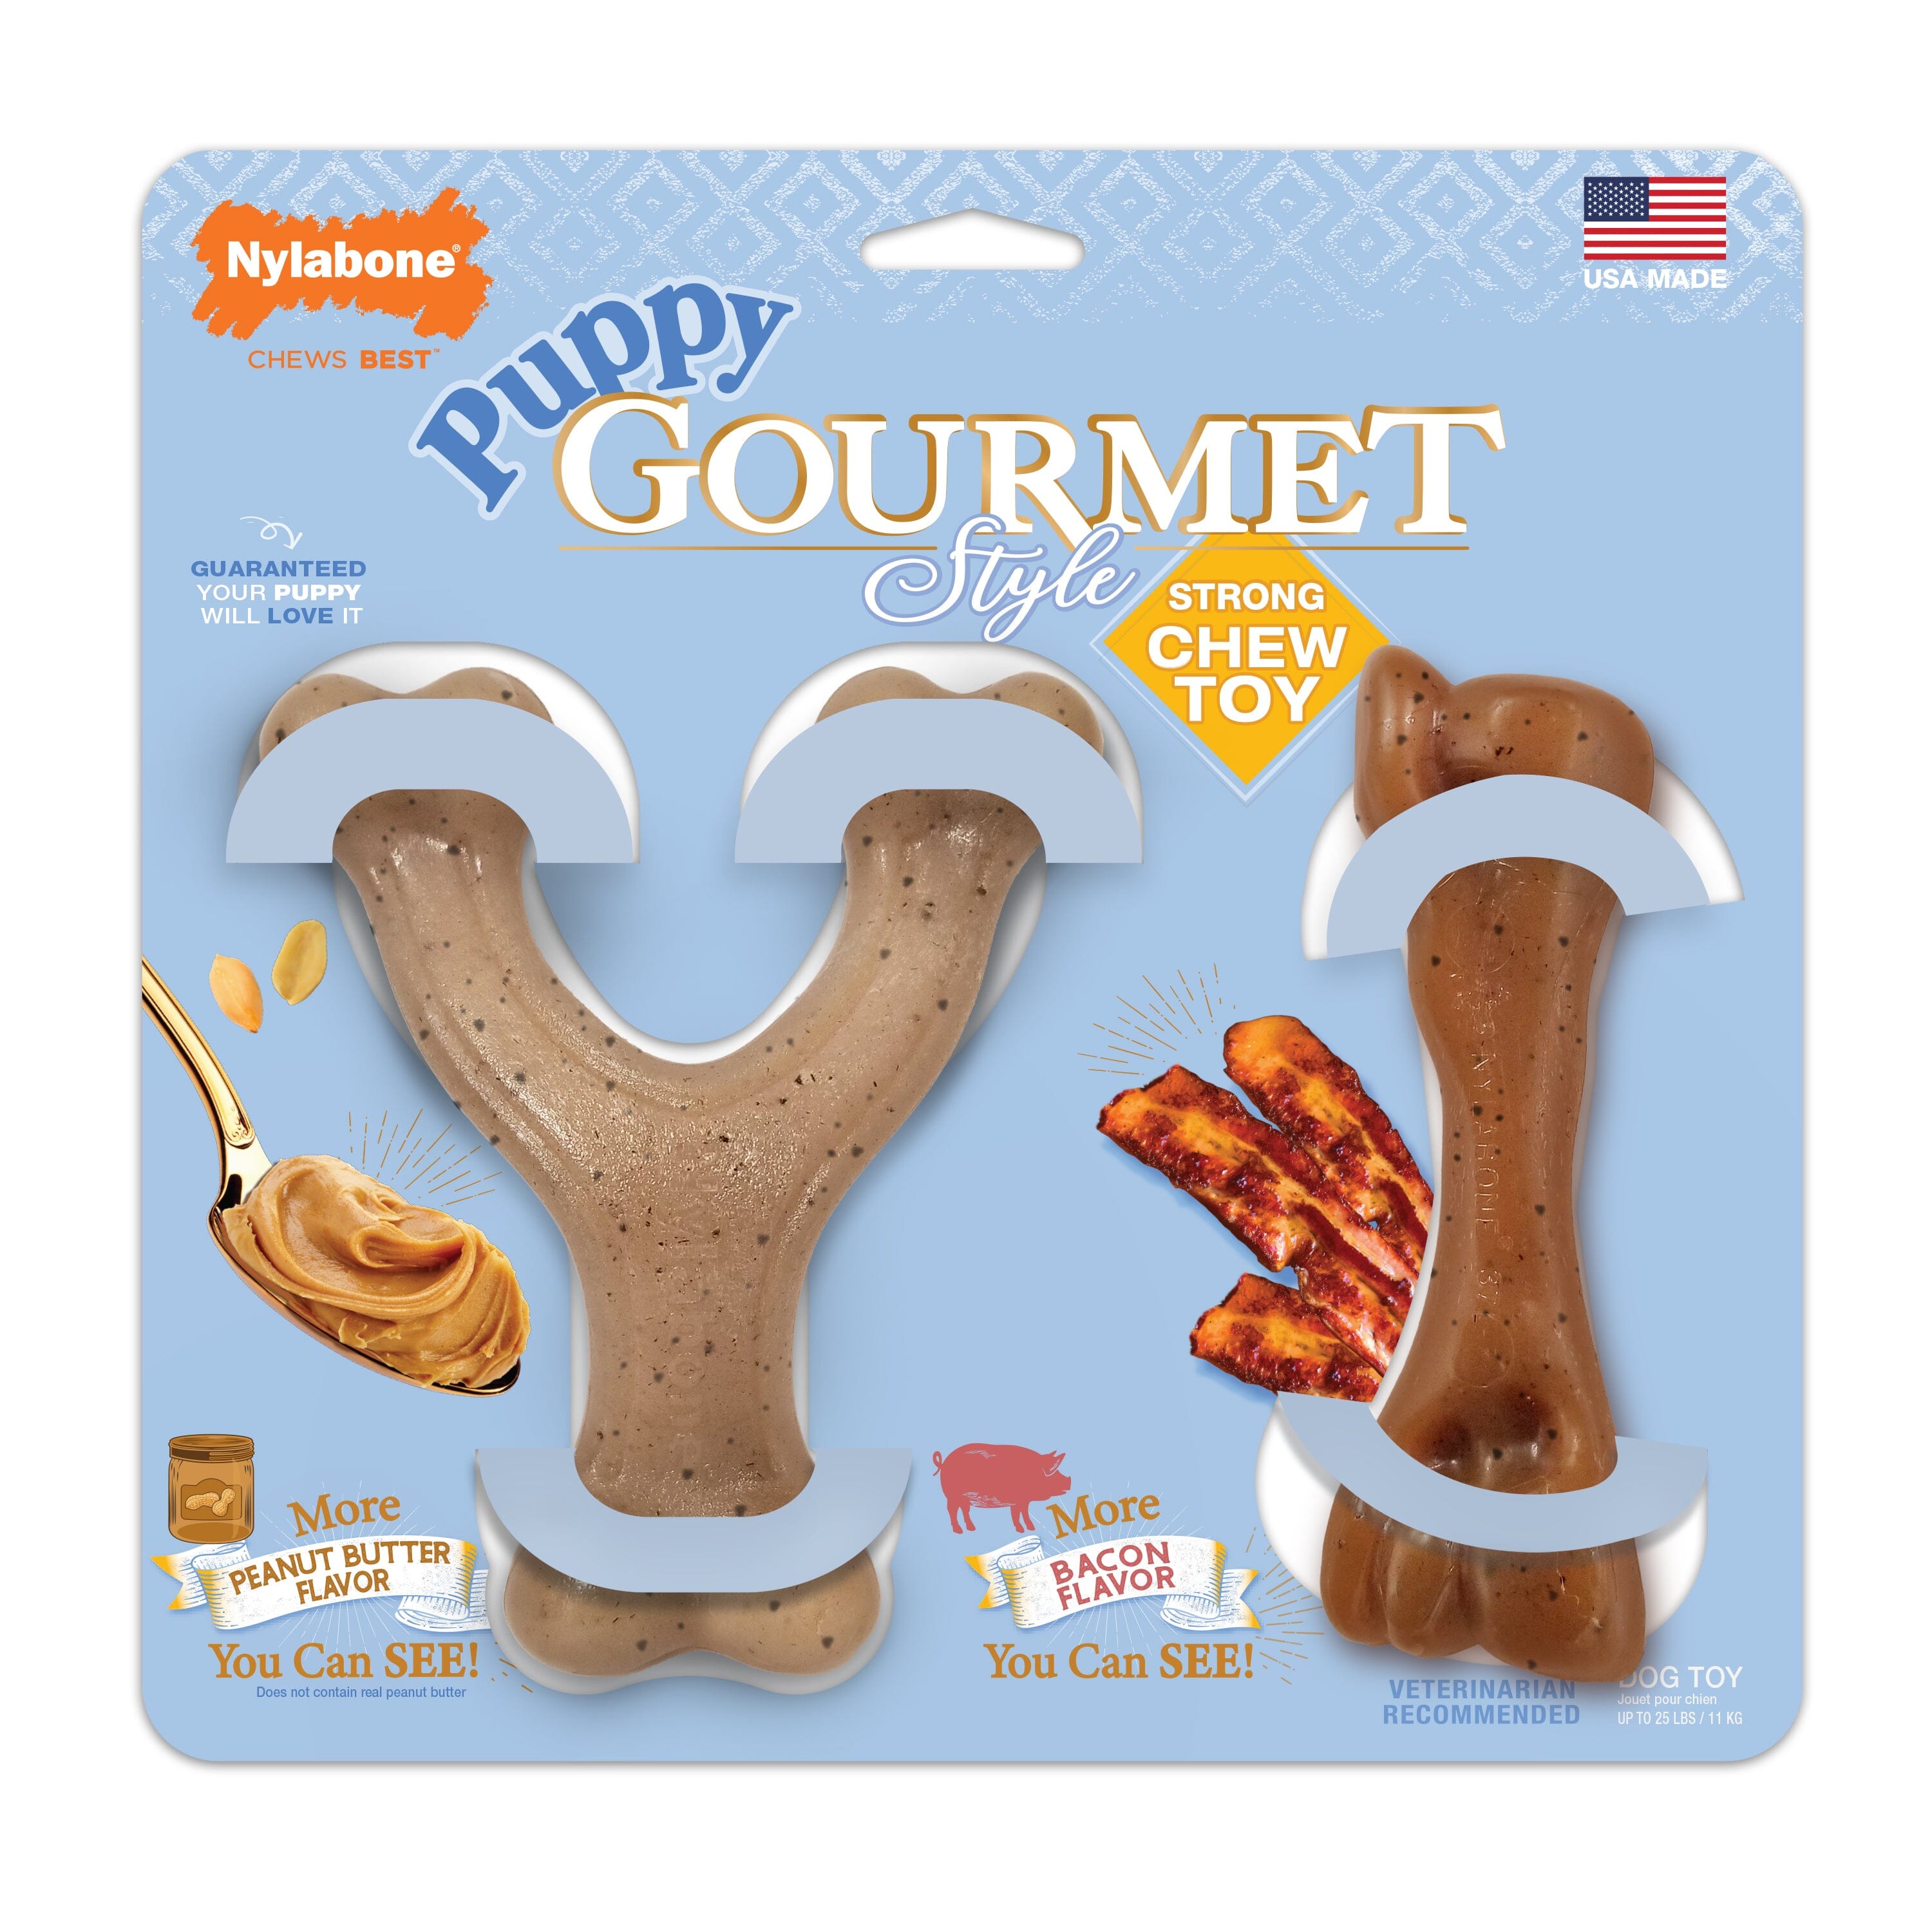 Nylabone Puppy Gourmet Style Strong Chew Toy Bundle Bacon, Peanut Butter - Small/Regular (2 Count)  